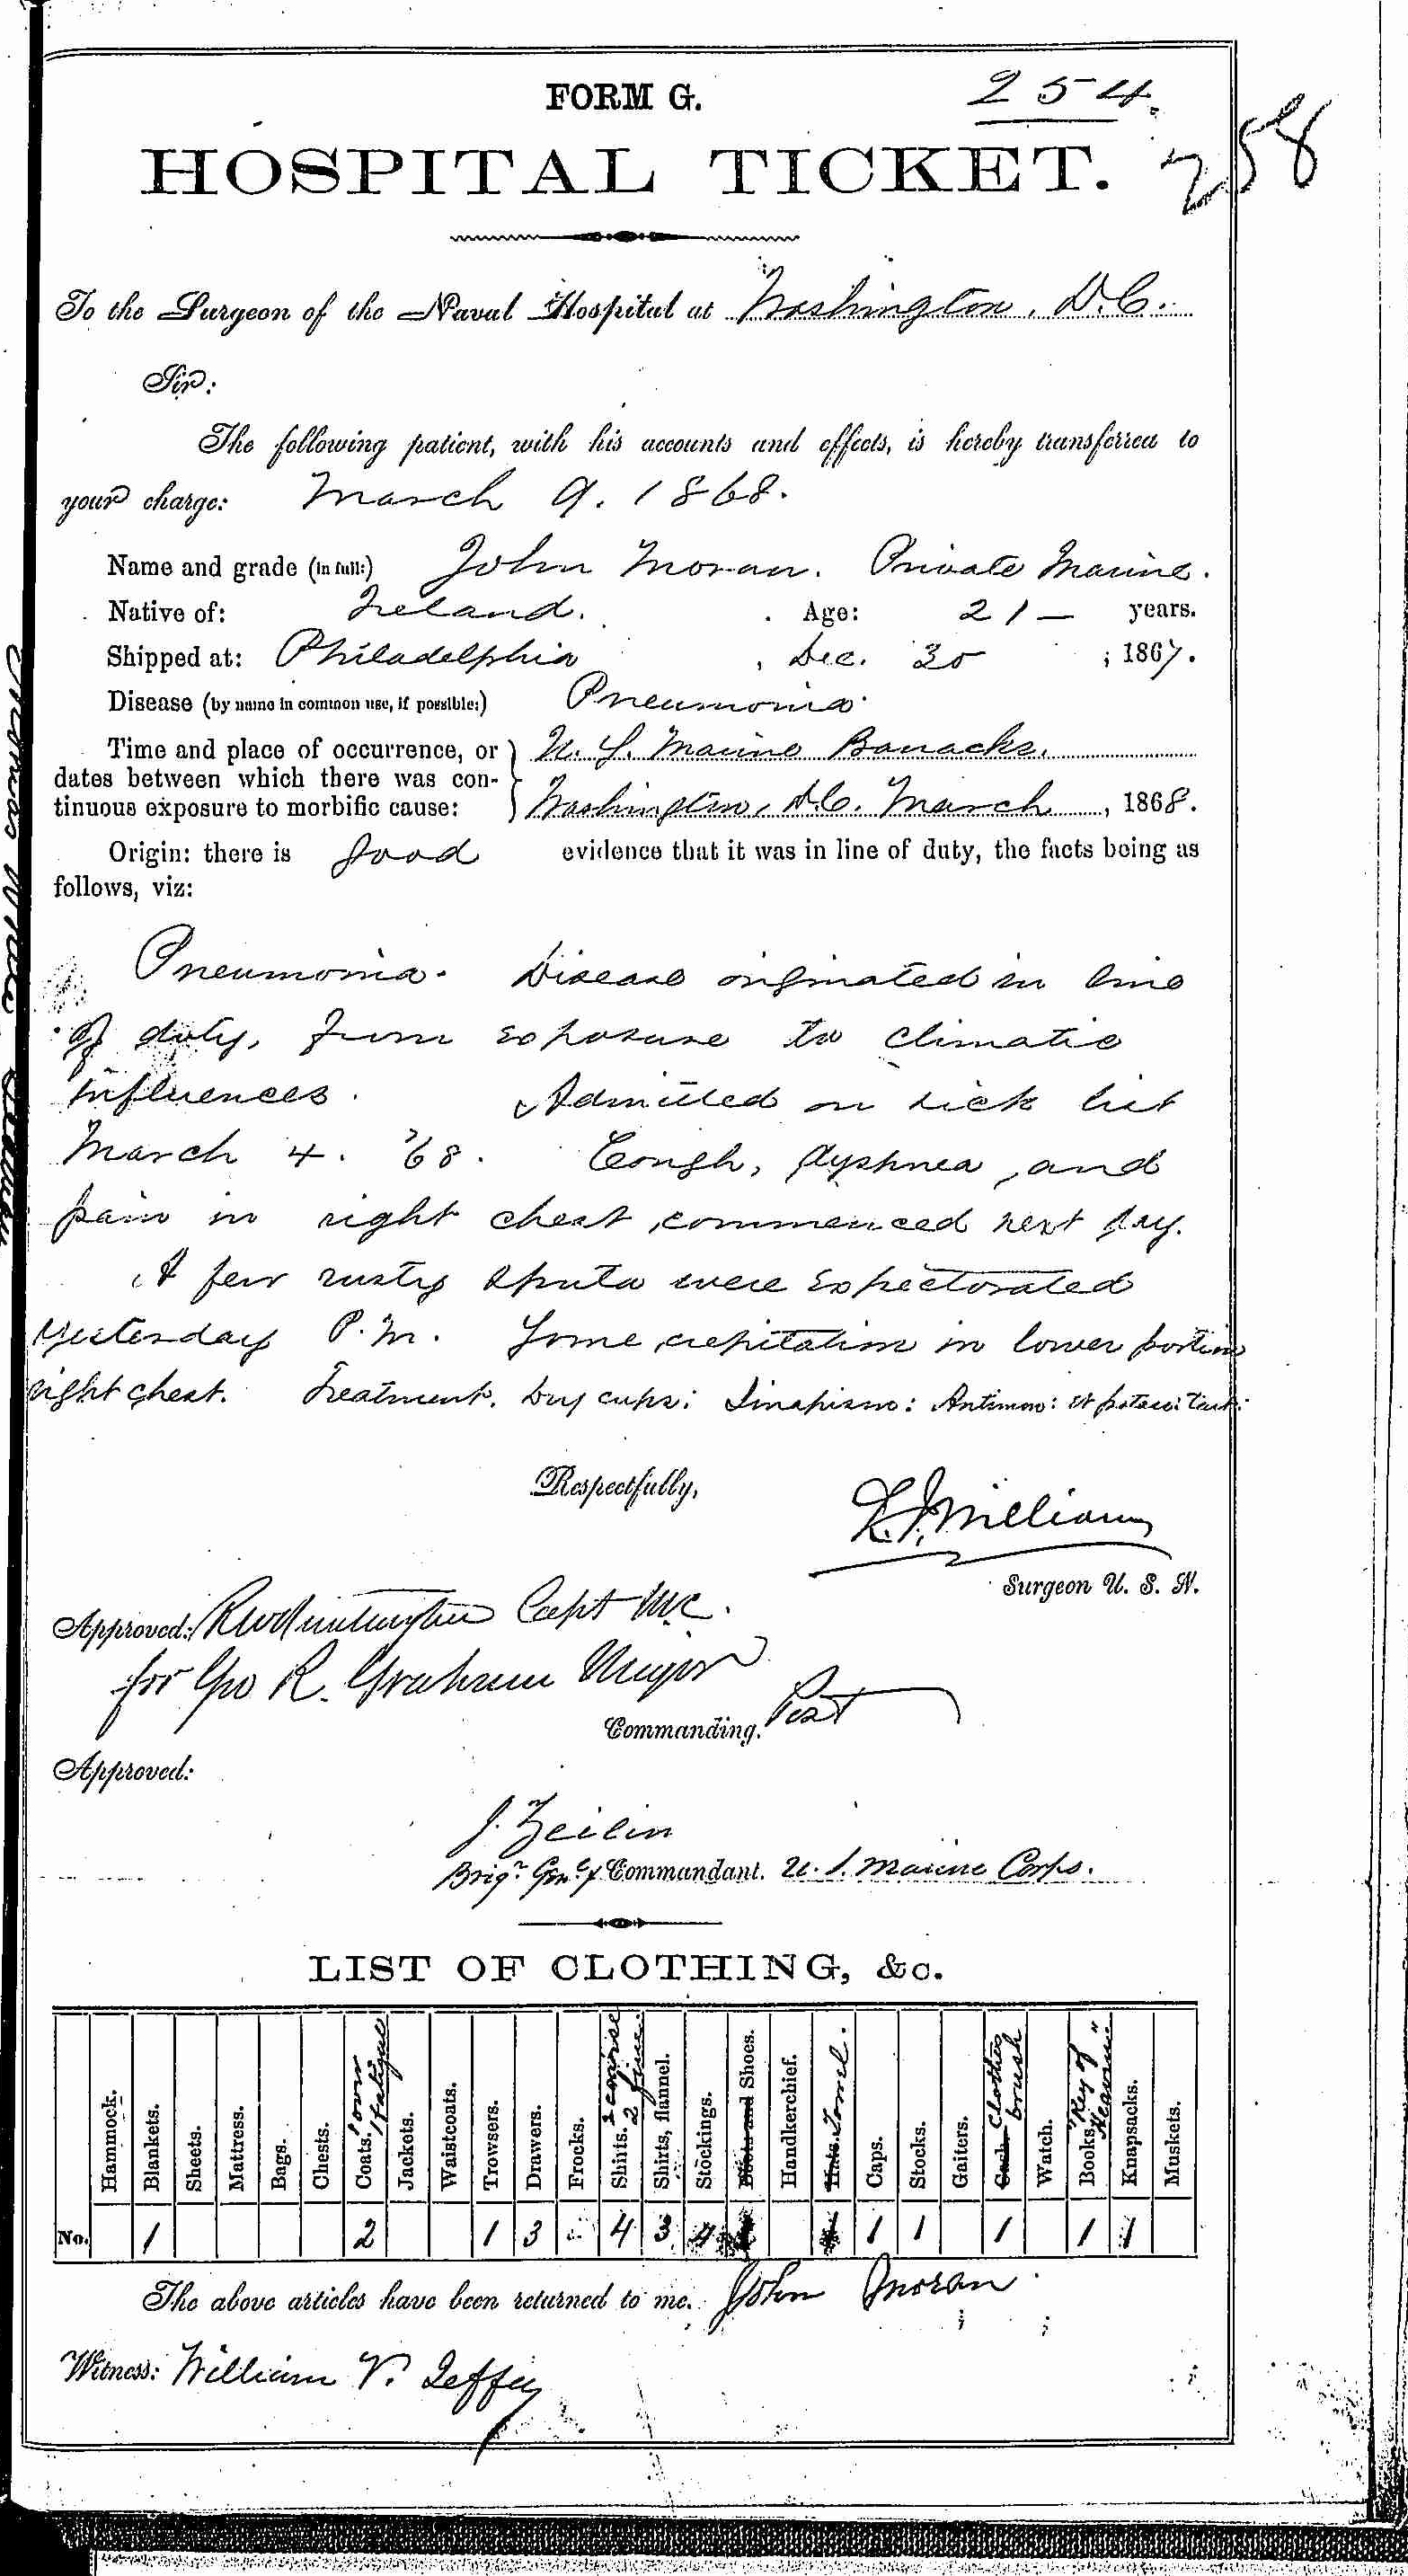 Entry for John Moran (page 1 of 2) in the log Hospital Tickets and Case Papers - Naval Hospital - Washington, D.C. - 1866-68